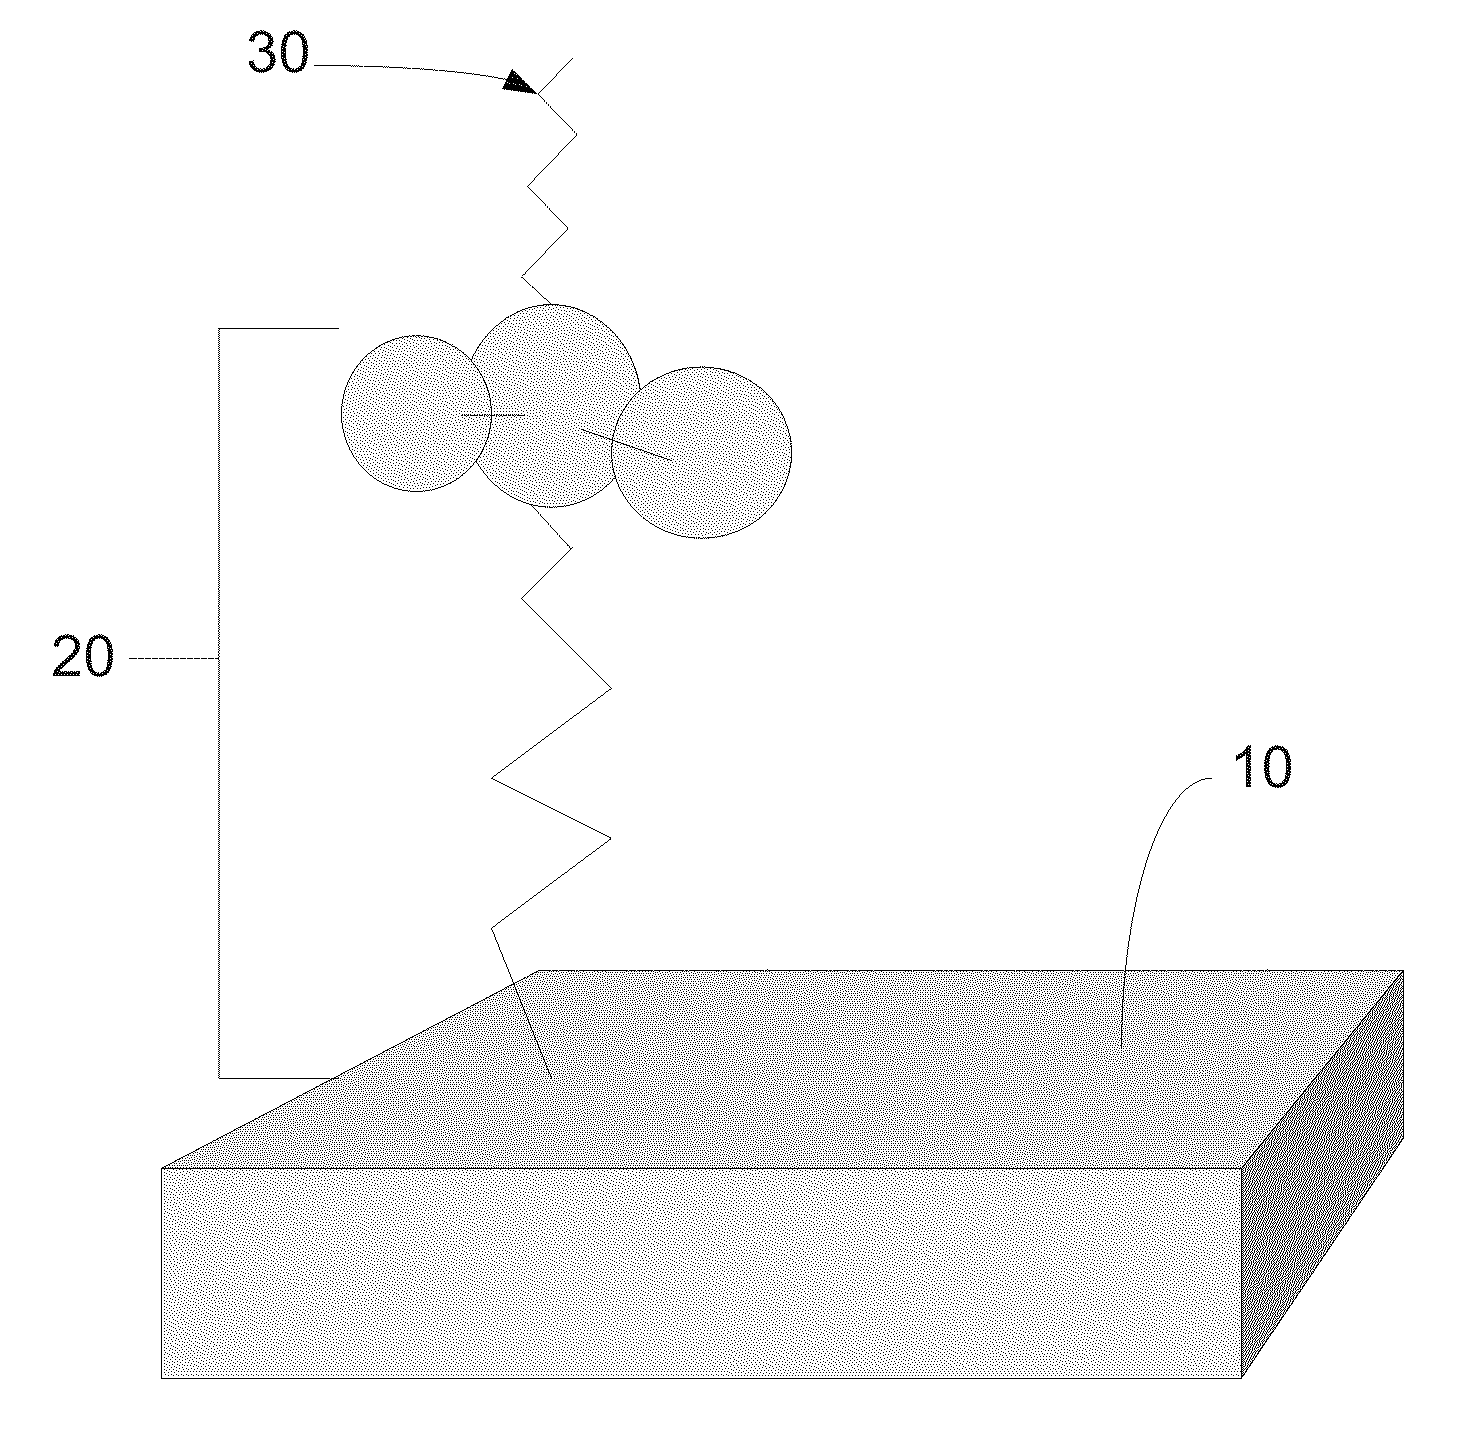 Anti-infective functionalized surfaces and methods of making same